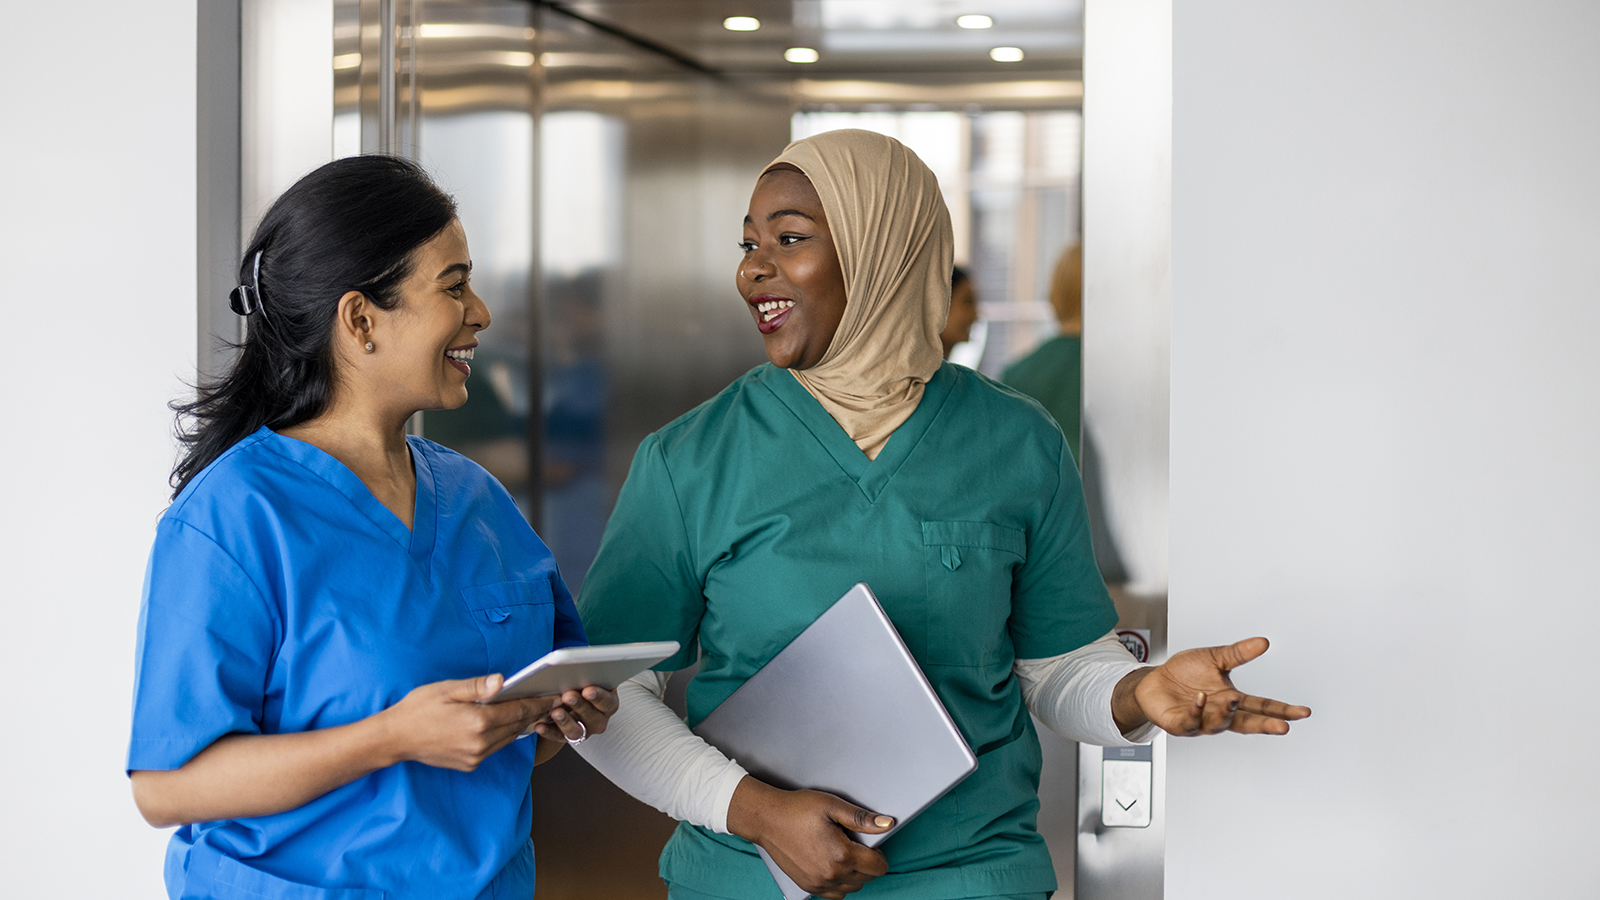 Two female healthcare workers of different nationalities talking together